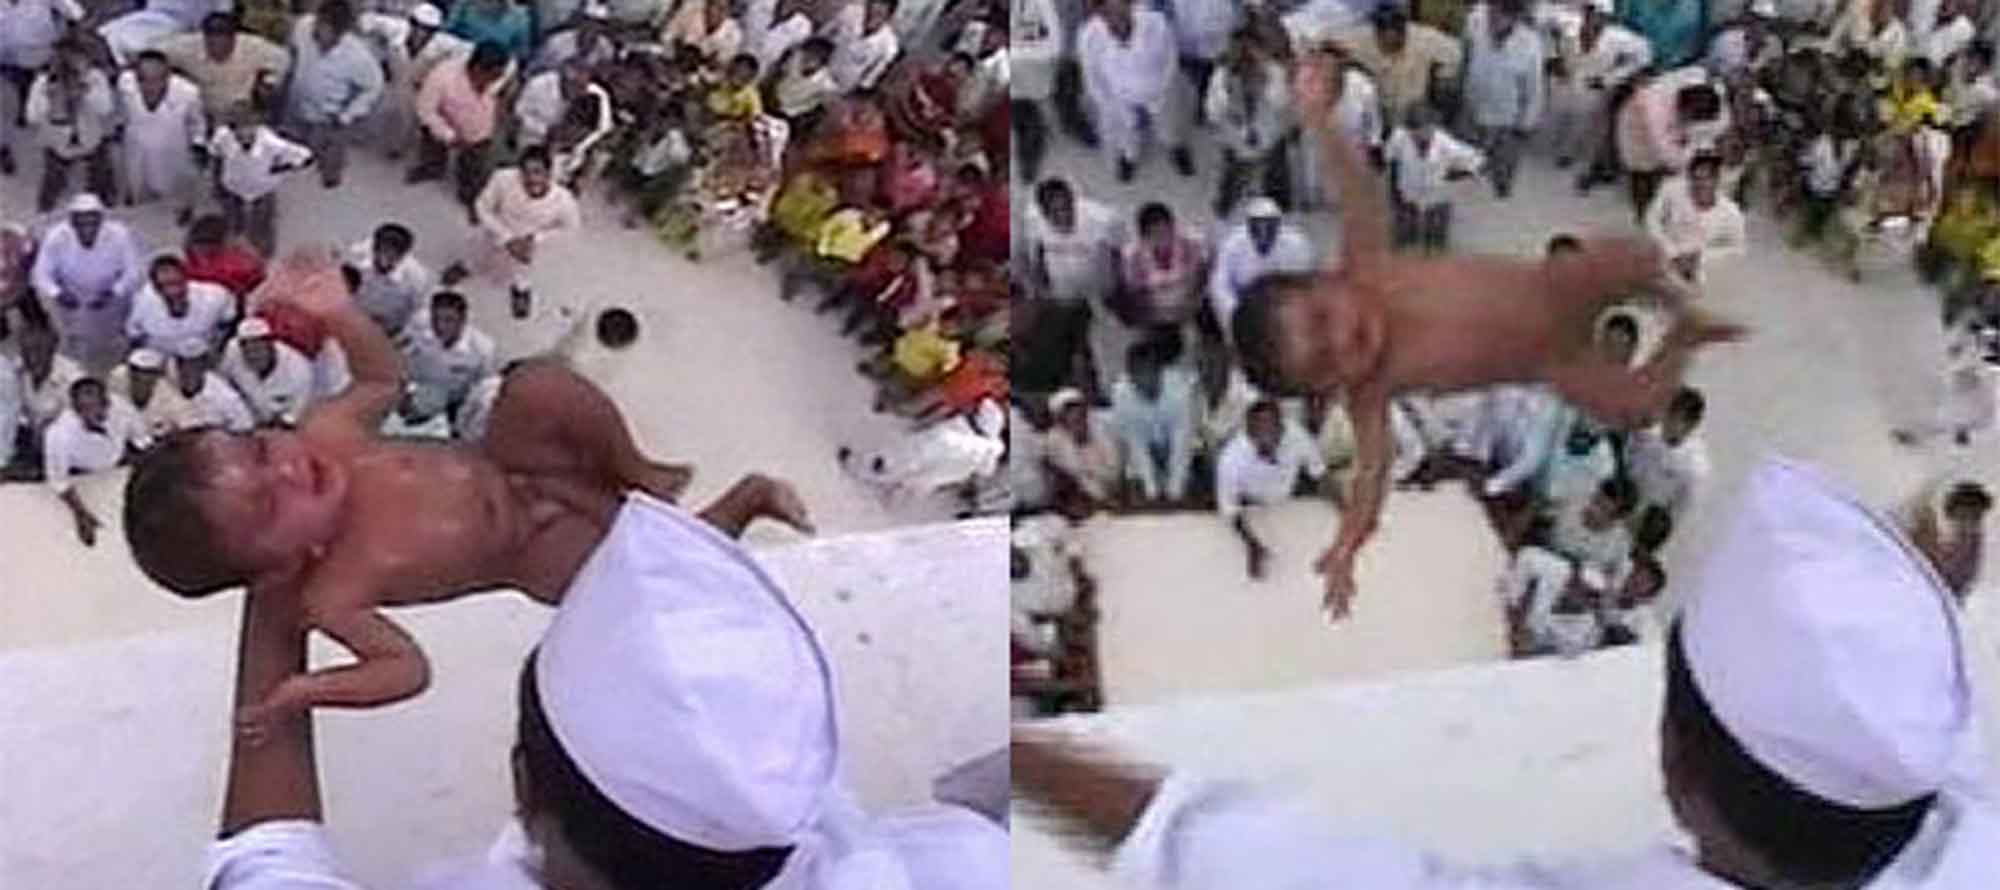 Have You Seen This? Strange Baby Dropping Ritual In India